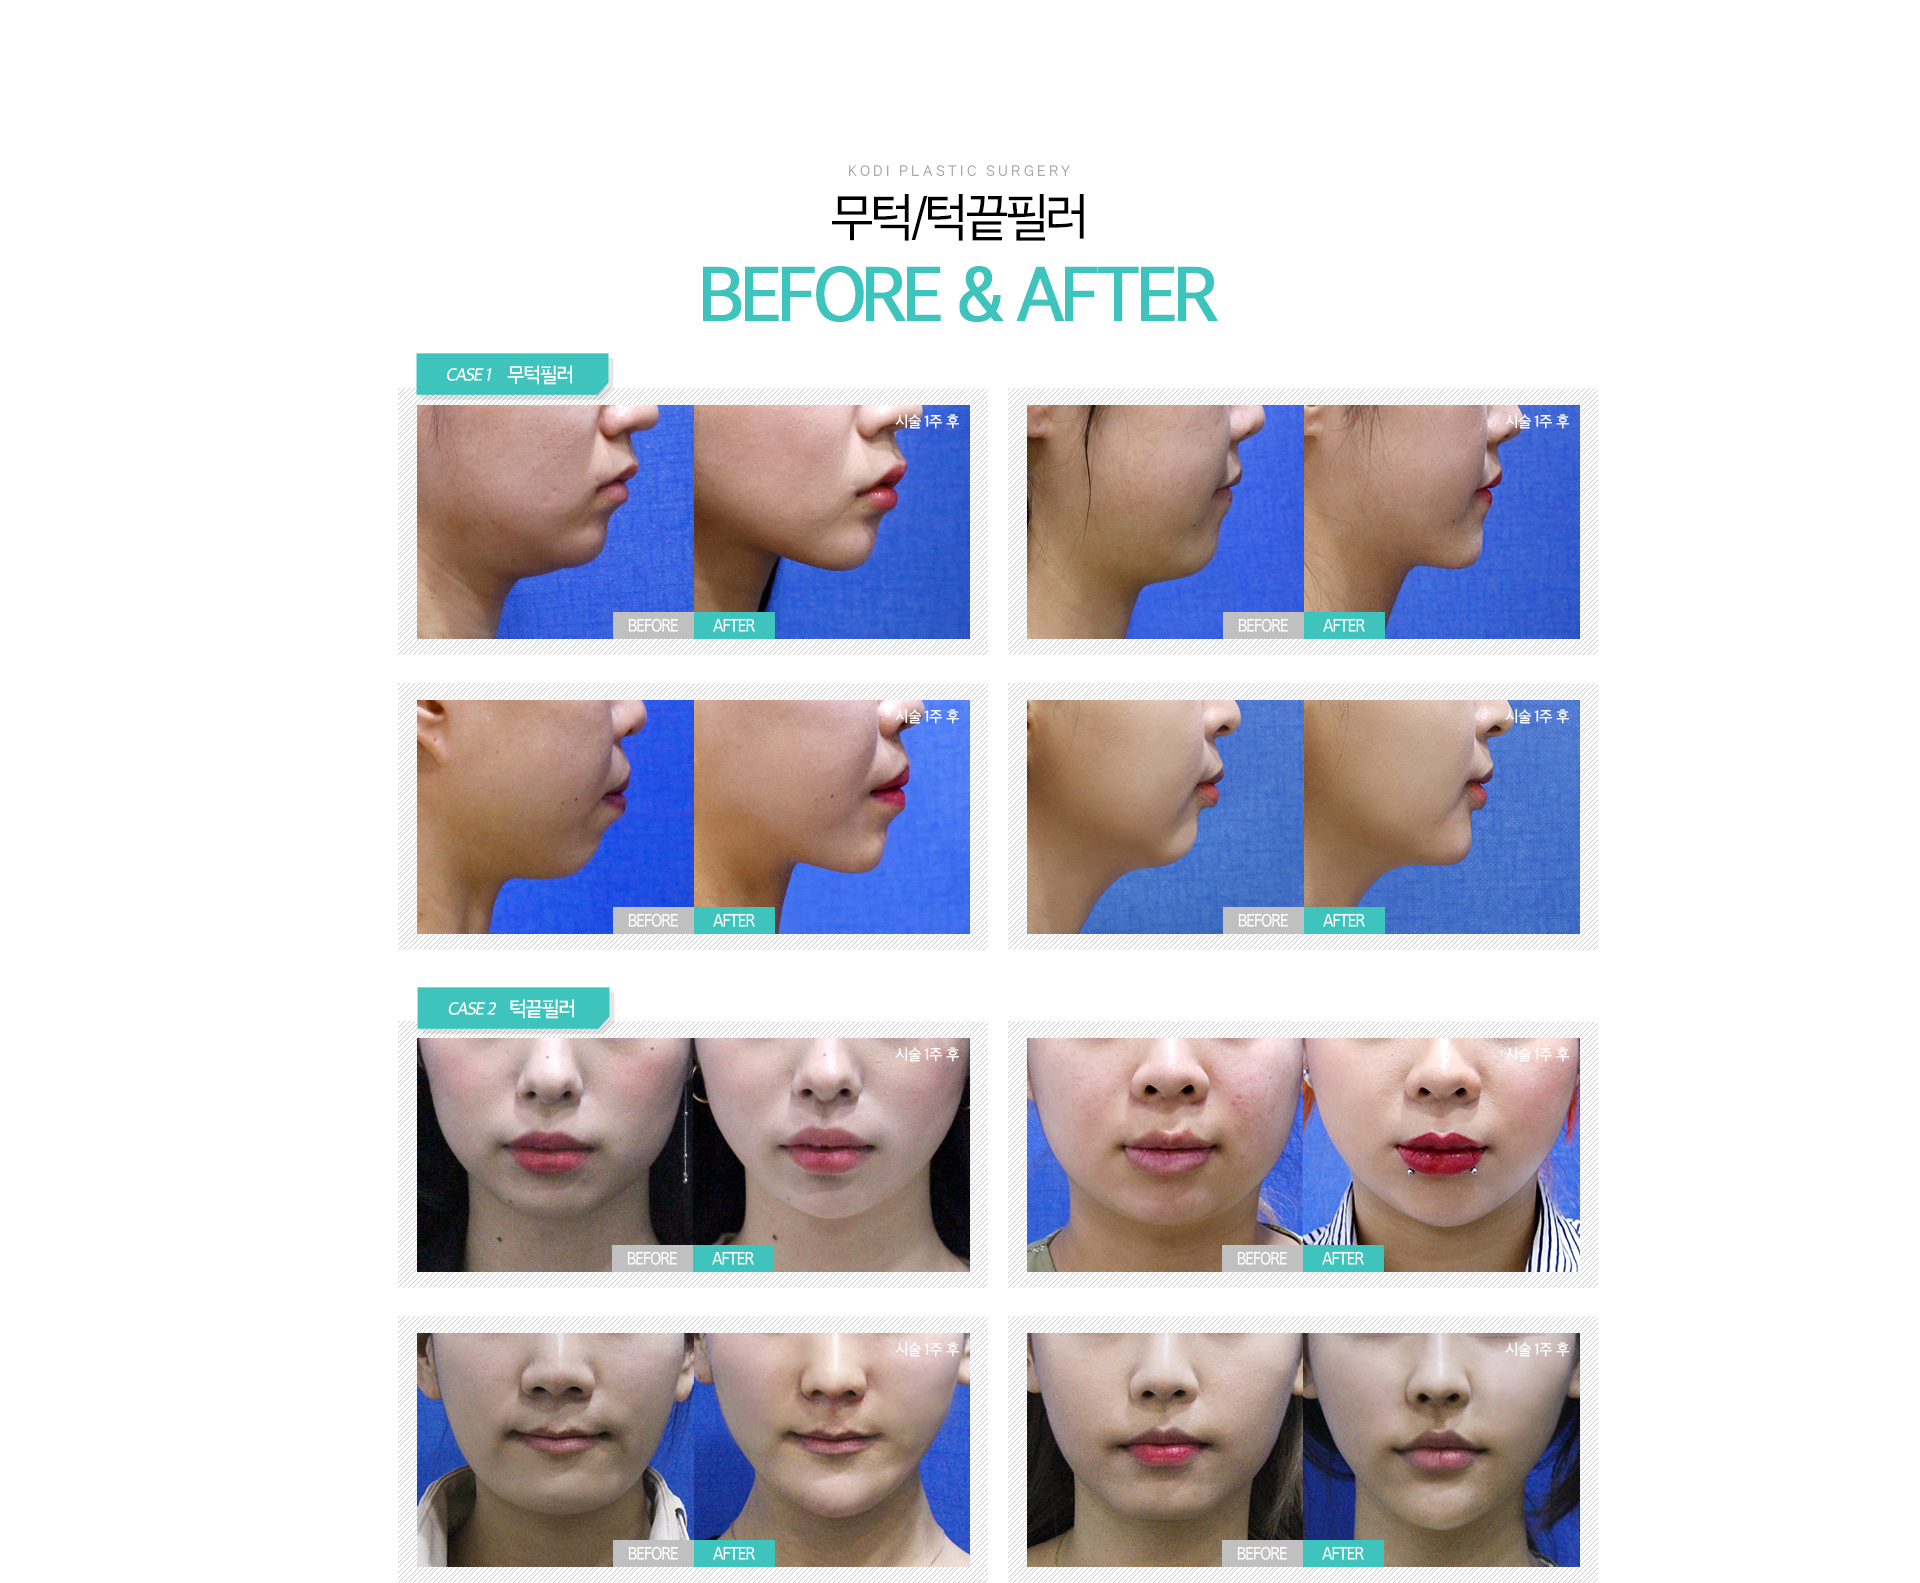 KODI PLASTIC SURGERY 무턱/턱끝필러 BEFORE&AFTER